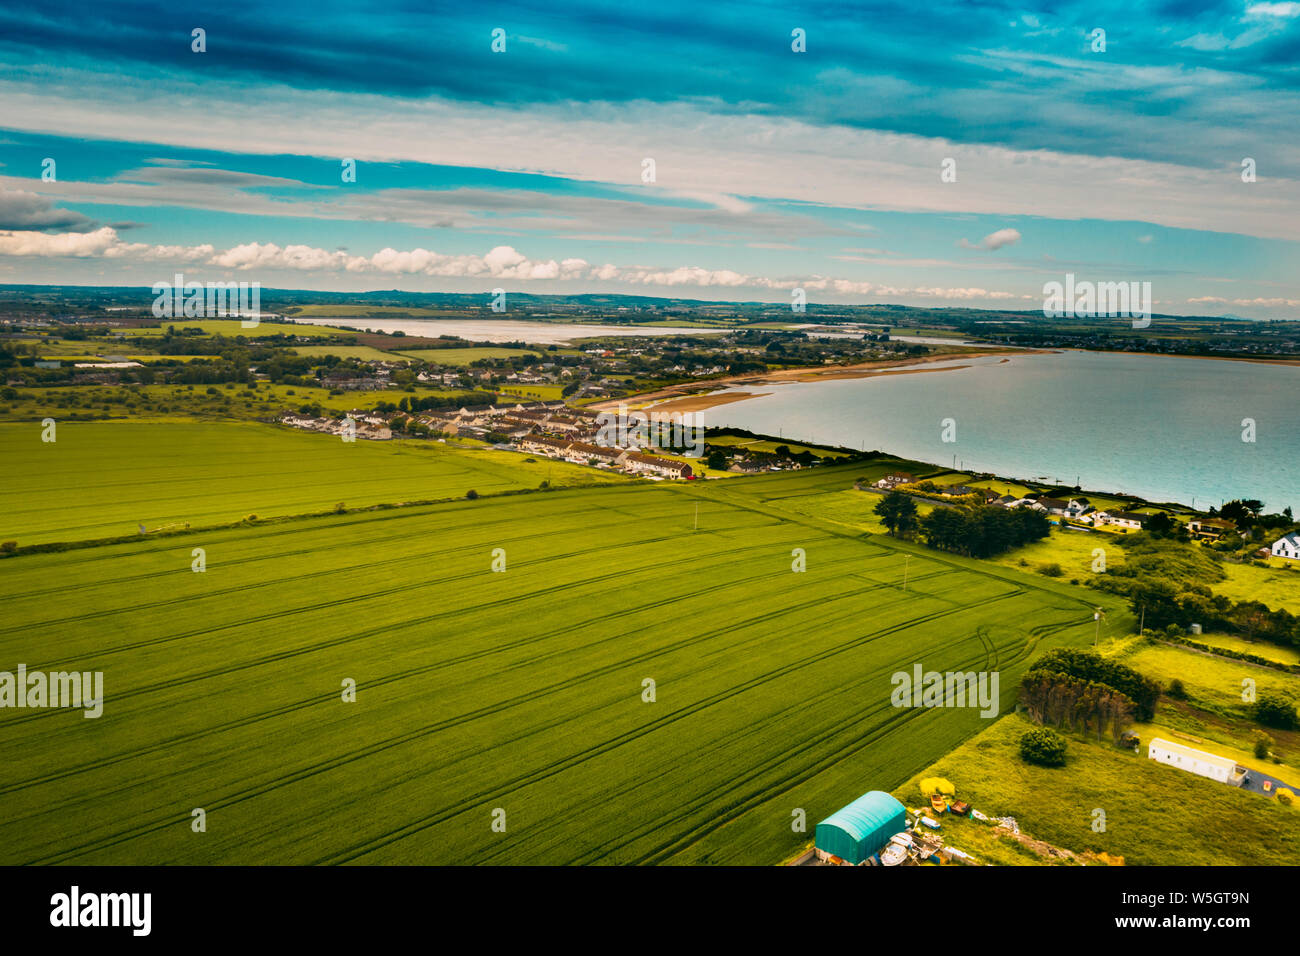 Landscape aerial view of Donabate region in Dublin, Ireland. Stock Photo